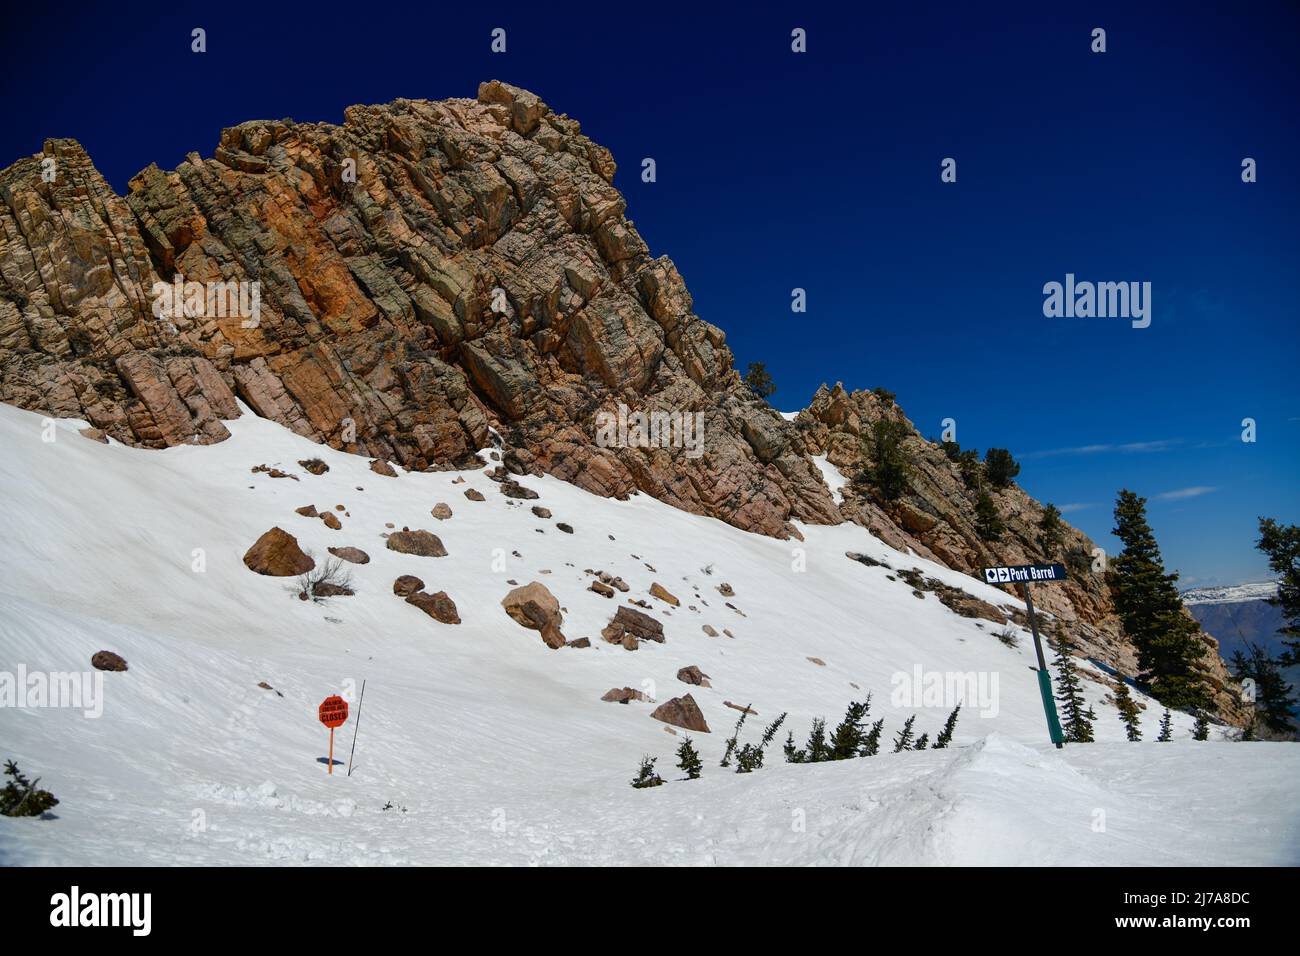 Beautiful landscape at Snowbasin Ski Resort, Utah. Snow slopes, rocky mountains and trees on a sunny day. Stock Photo